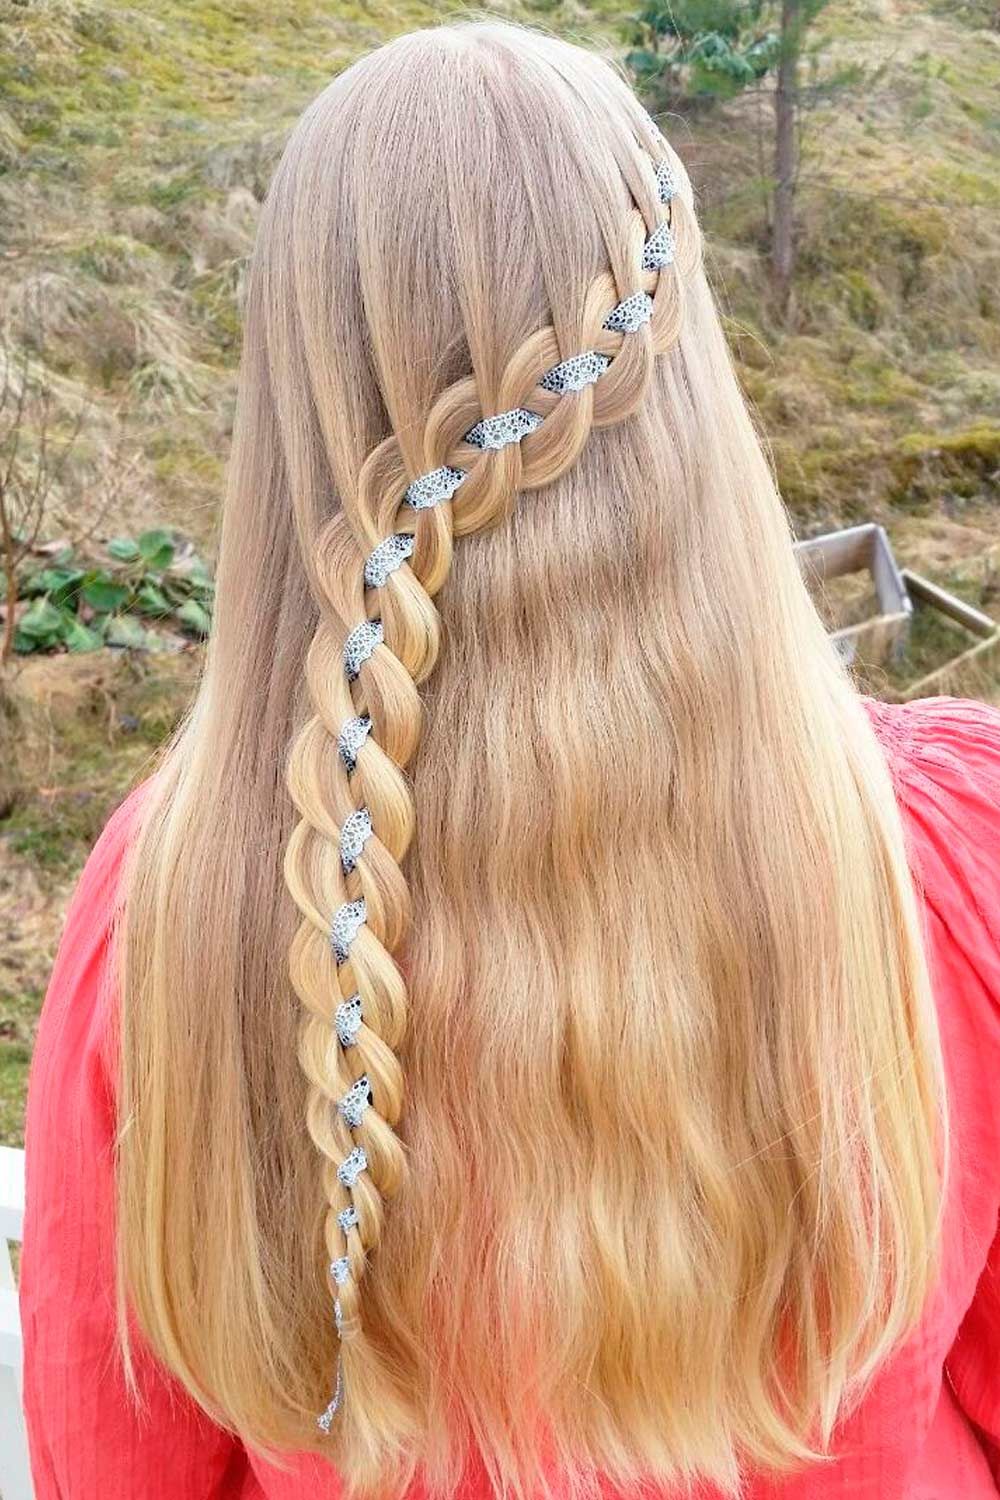 33+ Stylish Fun Hippie Hairstyles You Can Try Today